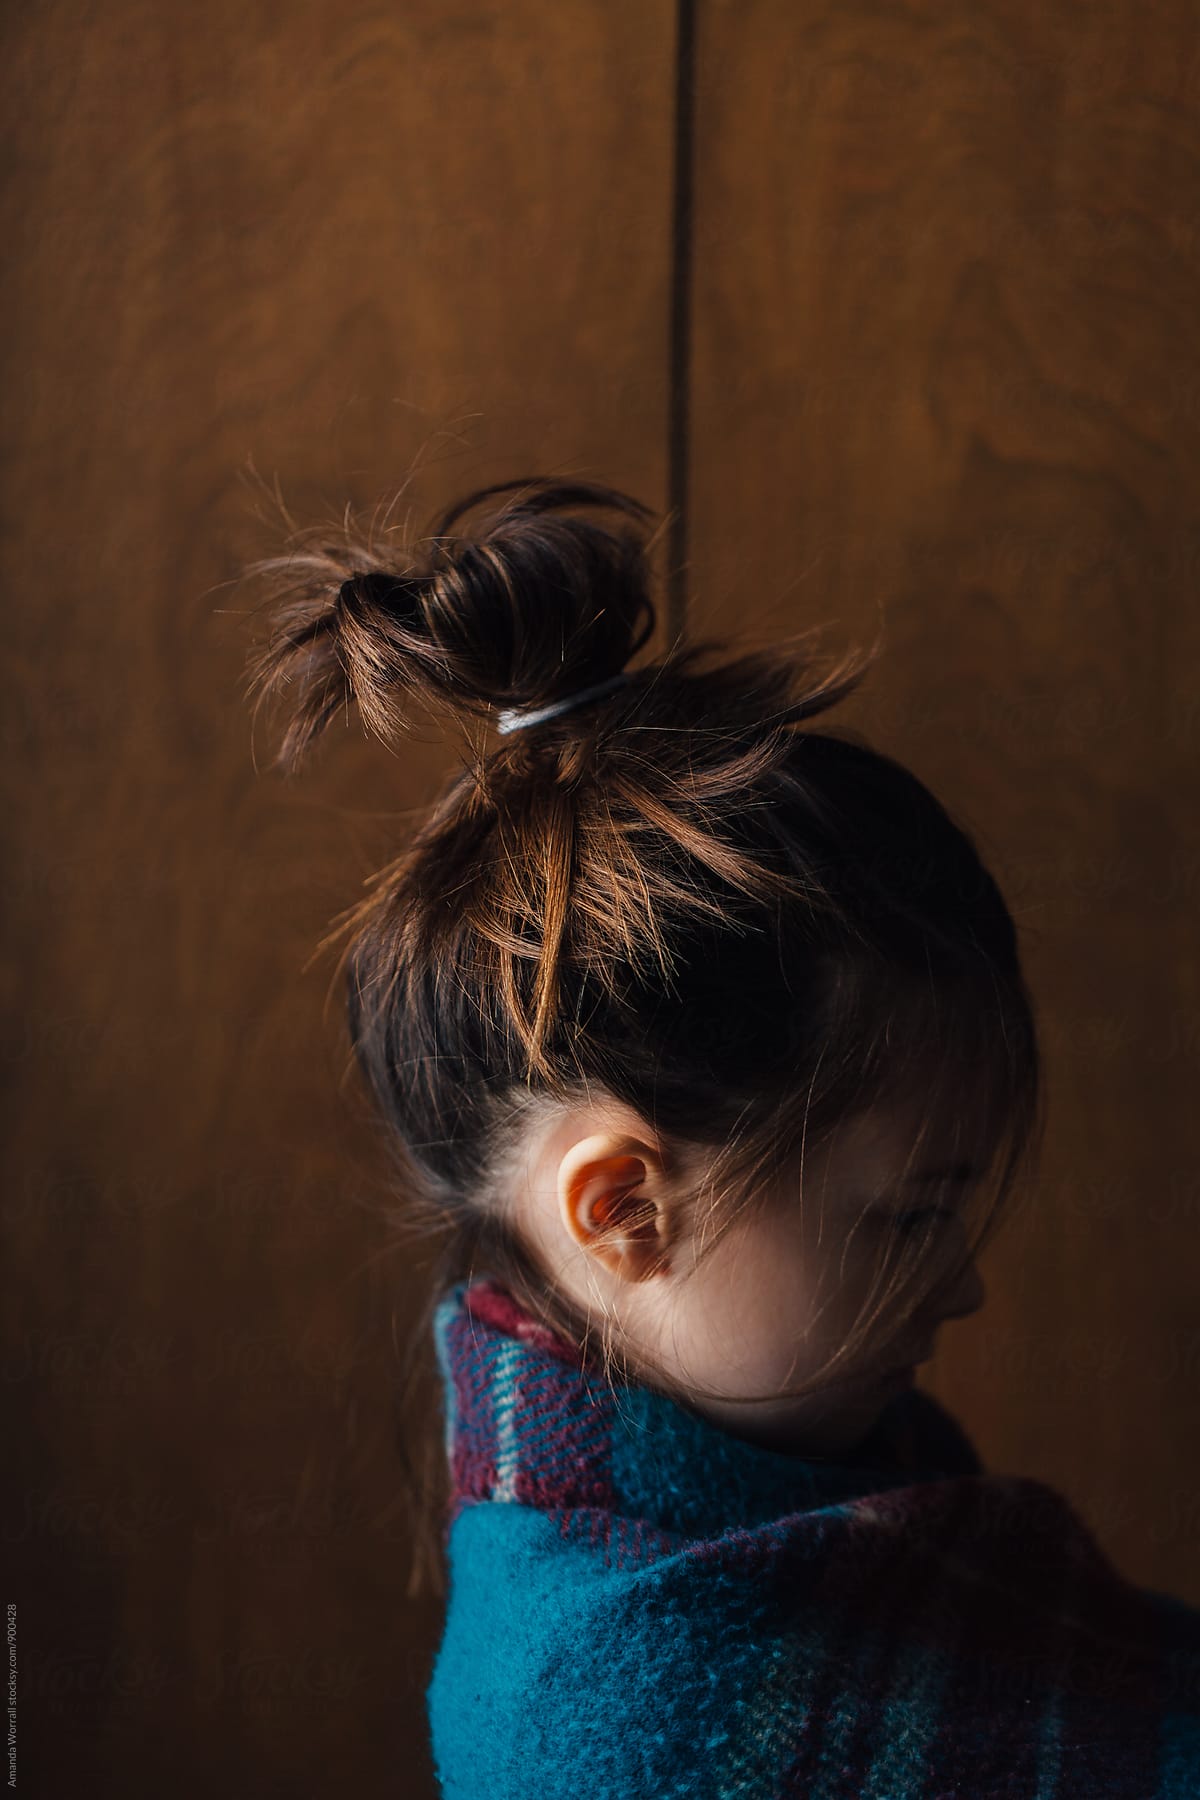 Profile portrait of young girl wrapped in a blanket, hair up in a messy bun